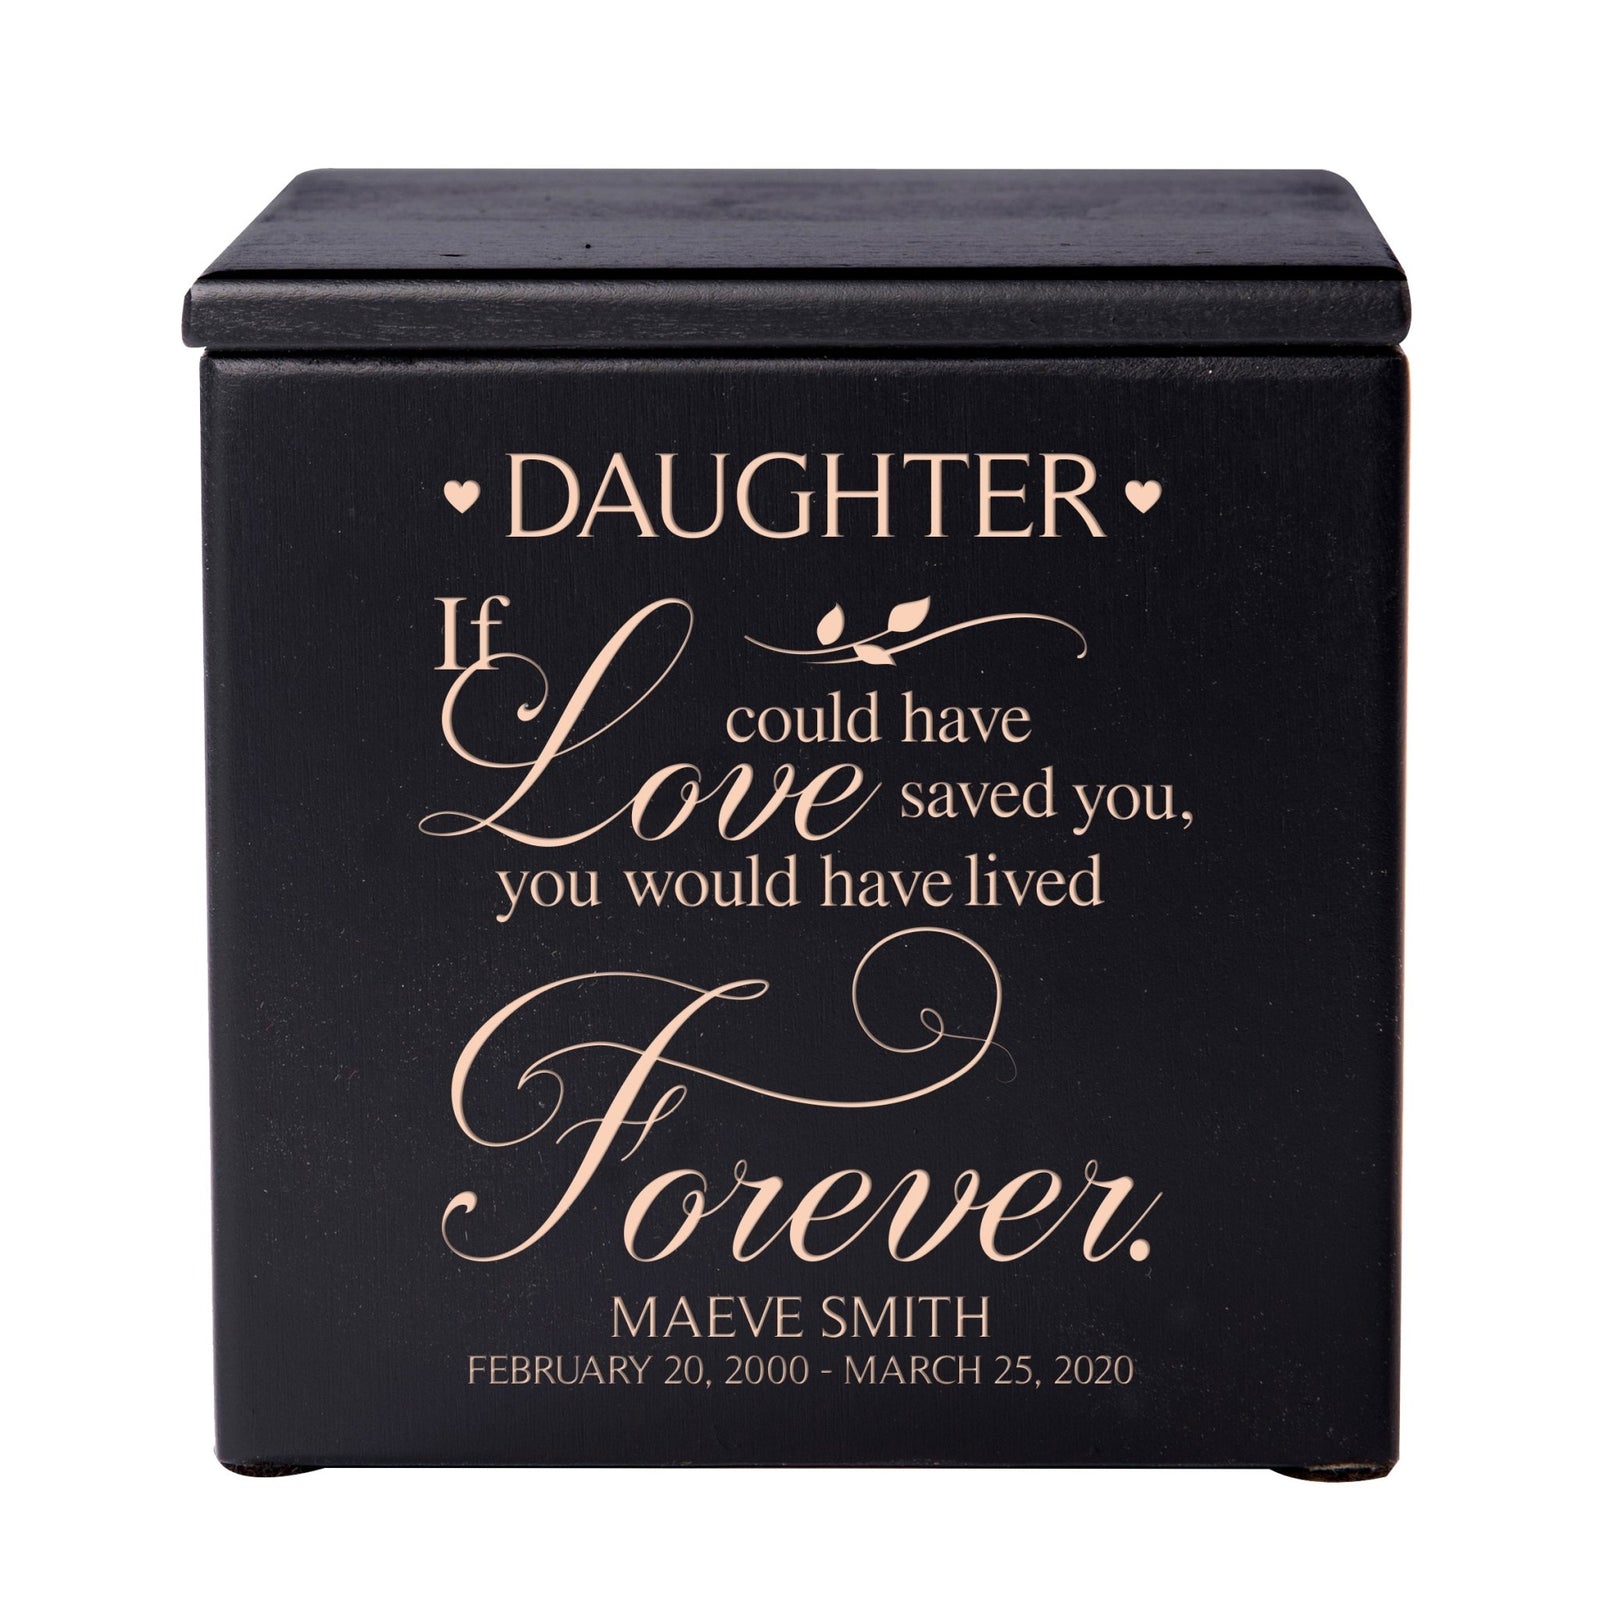 Custom Engraved Memorial Cremation Urn Box Holds 49 Cu Inches Of Human Ashes (If love could have saved Daughter) Funeral and Condolence Keepsake - LifeSong Milestones